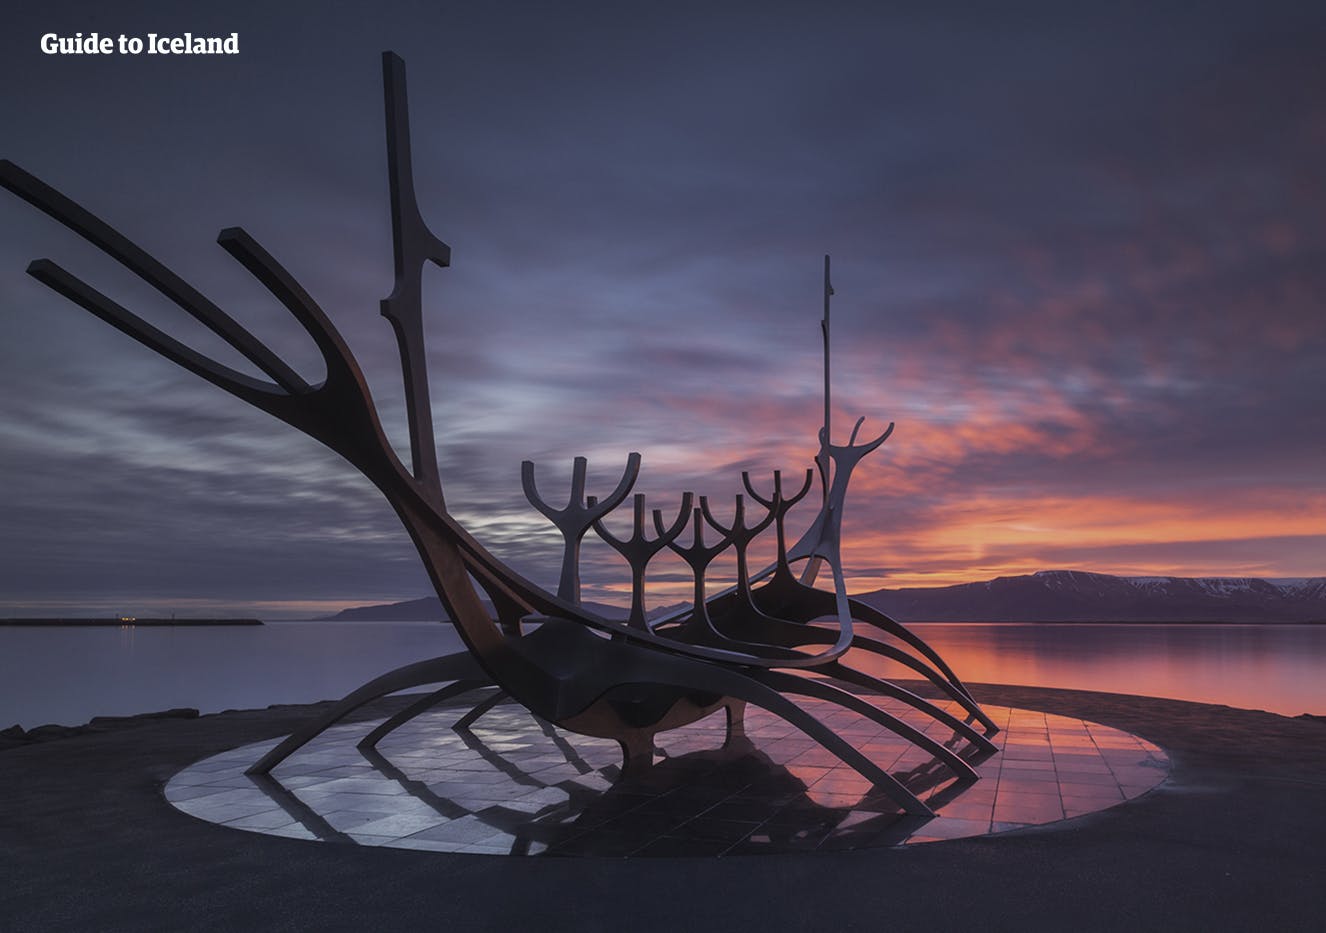 Reykjavík is a city of art and sculptures; the Sun Voyager is the most famous.